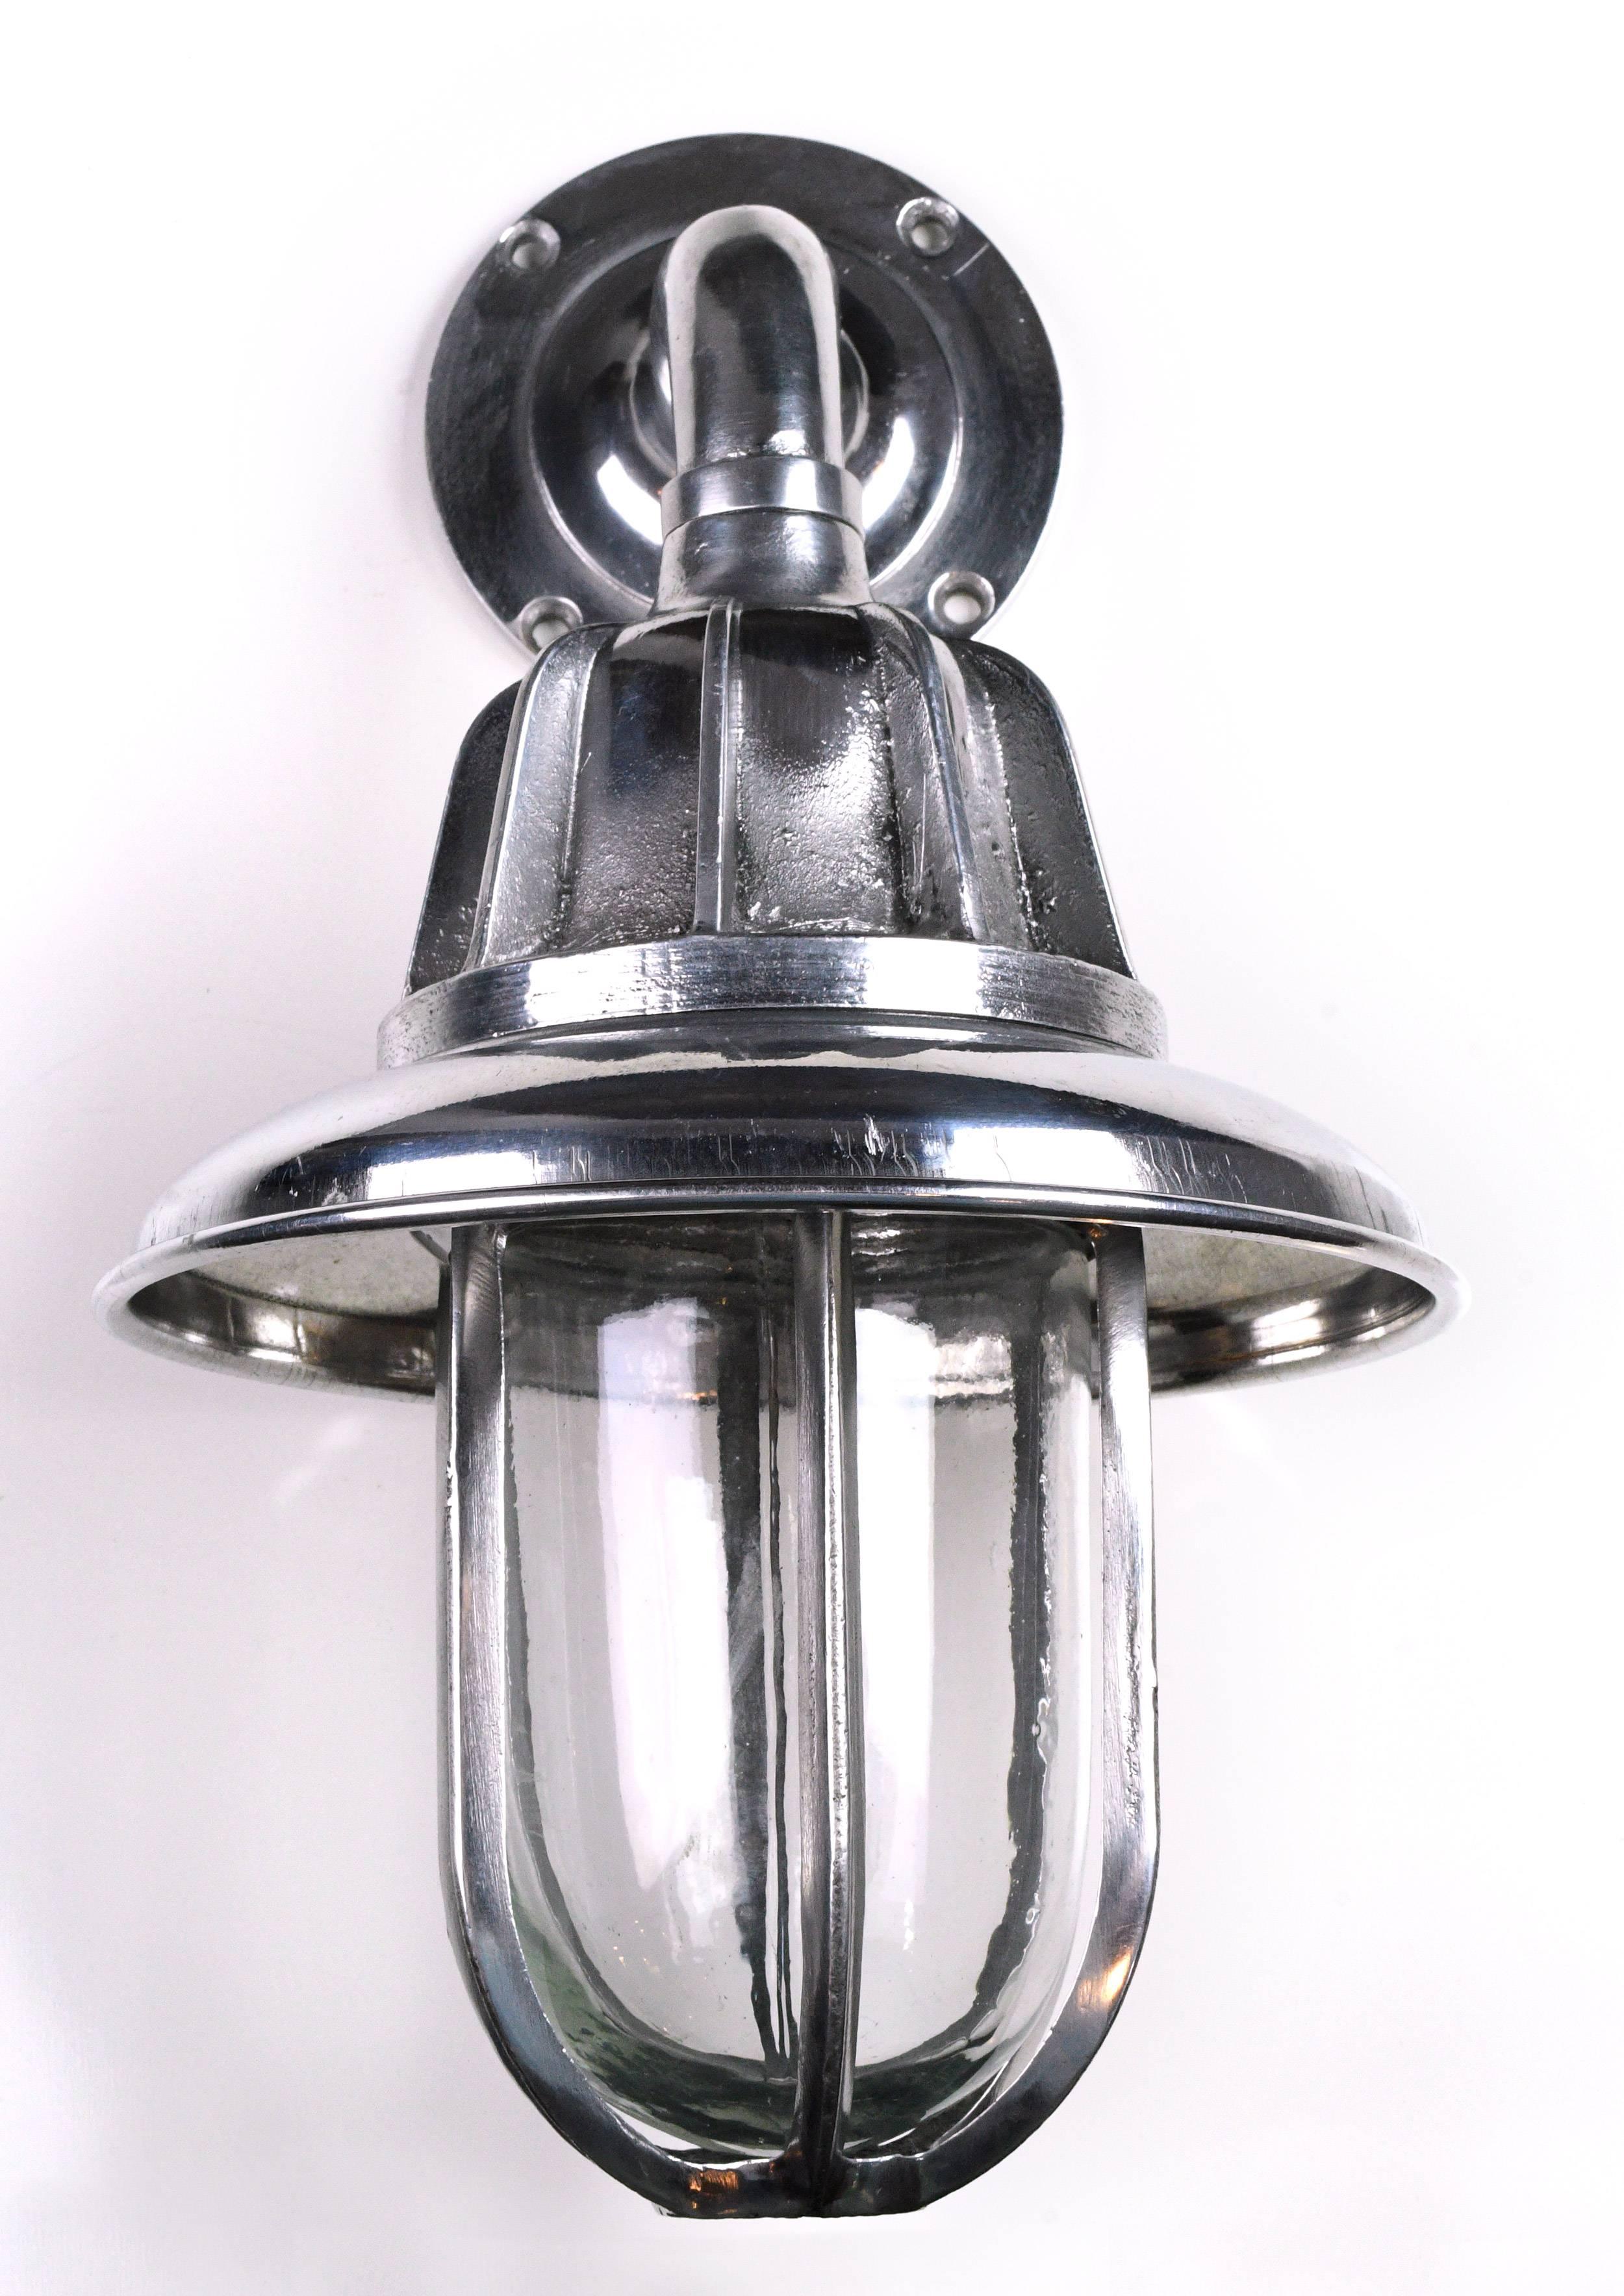 Shiny cast aluminium nautical sconce in like-new condition. Comes with removable hood, giving you two distinct looks. The perfect fit for any number of design styles: think sleek Industrial, modern, and maritime-inspired. 

Search for item number